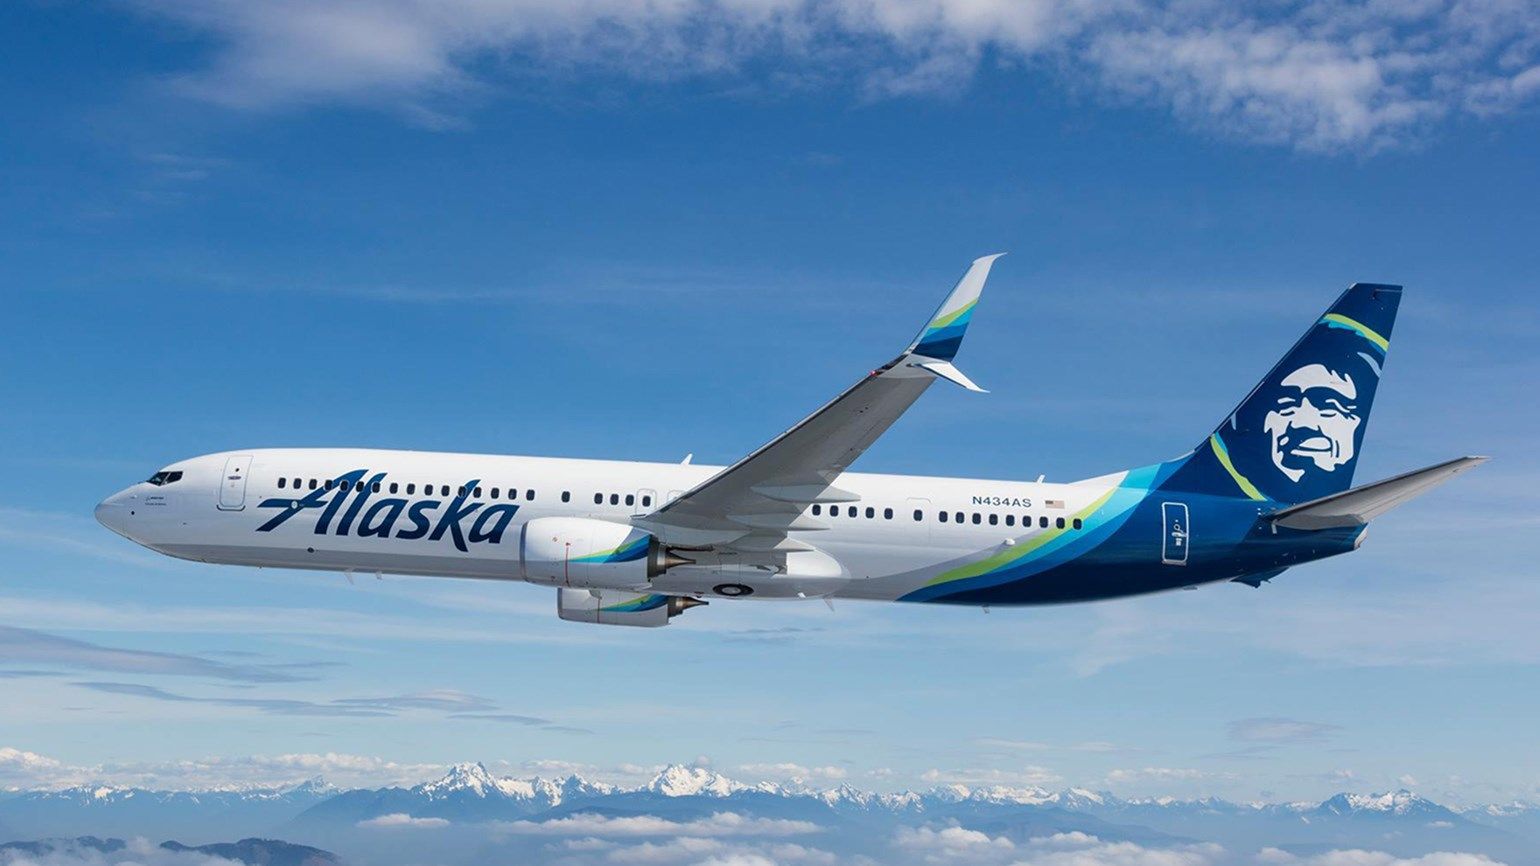 COMPLETE INFORMATION TO BOOK A FLIGHT TICKET TO LAS VEGAS ON ALASKA AIRLINES